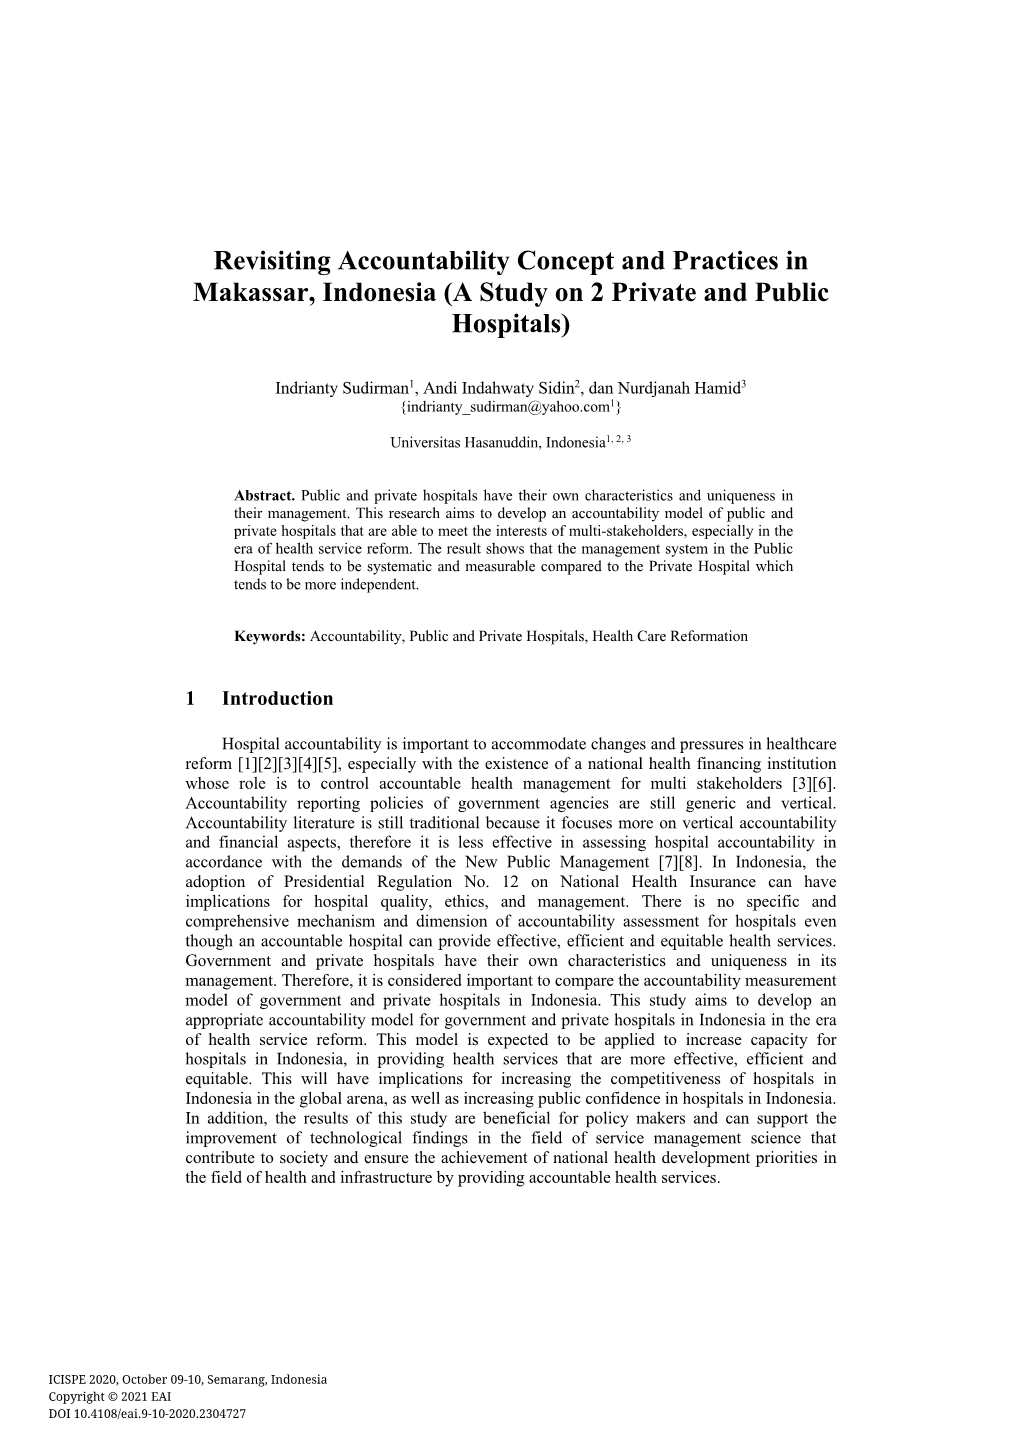 Revisiting Accountability Concept and Practices in Makassar, Indonesia (A Study on 2 Private and Public Hospitals)